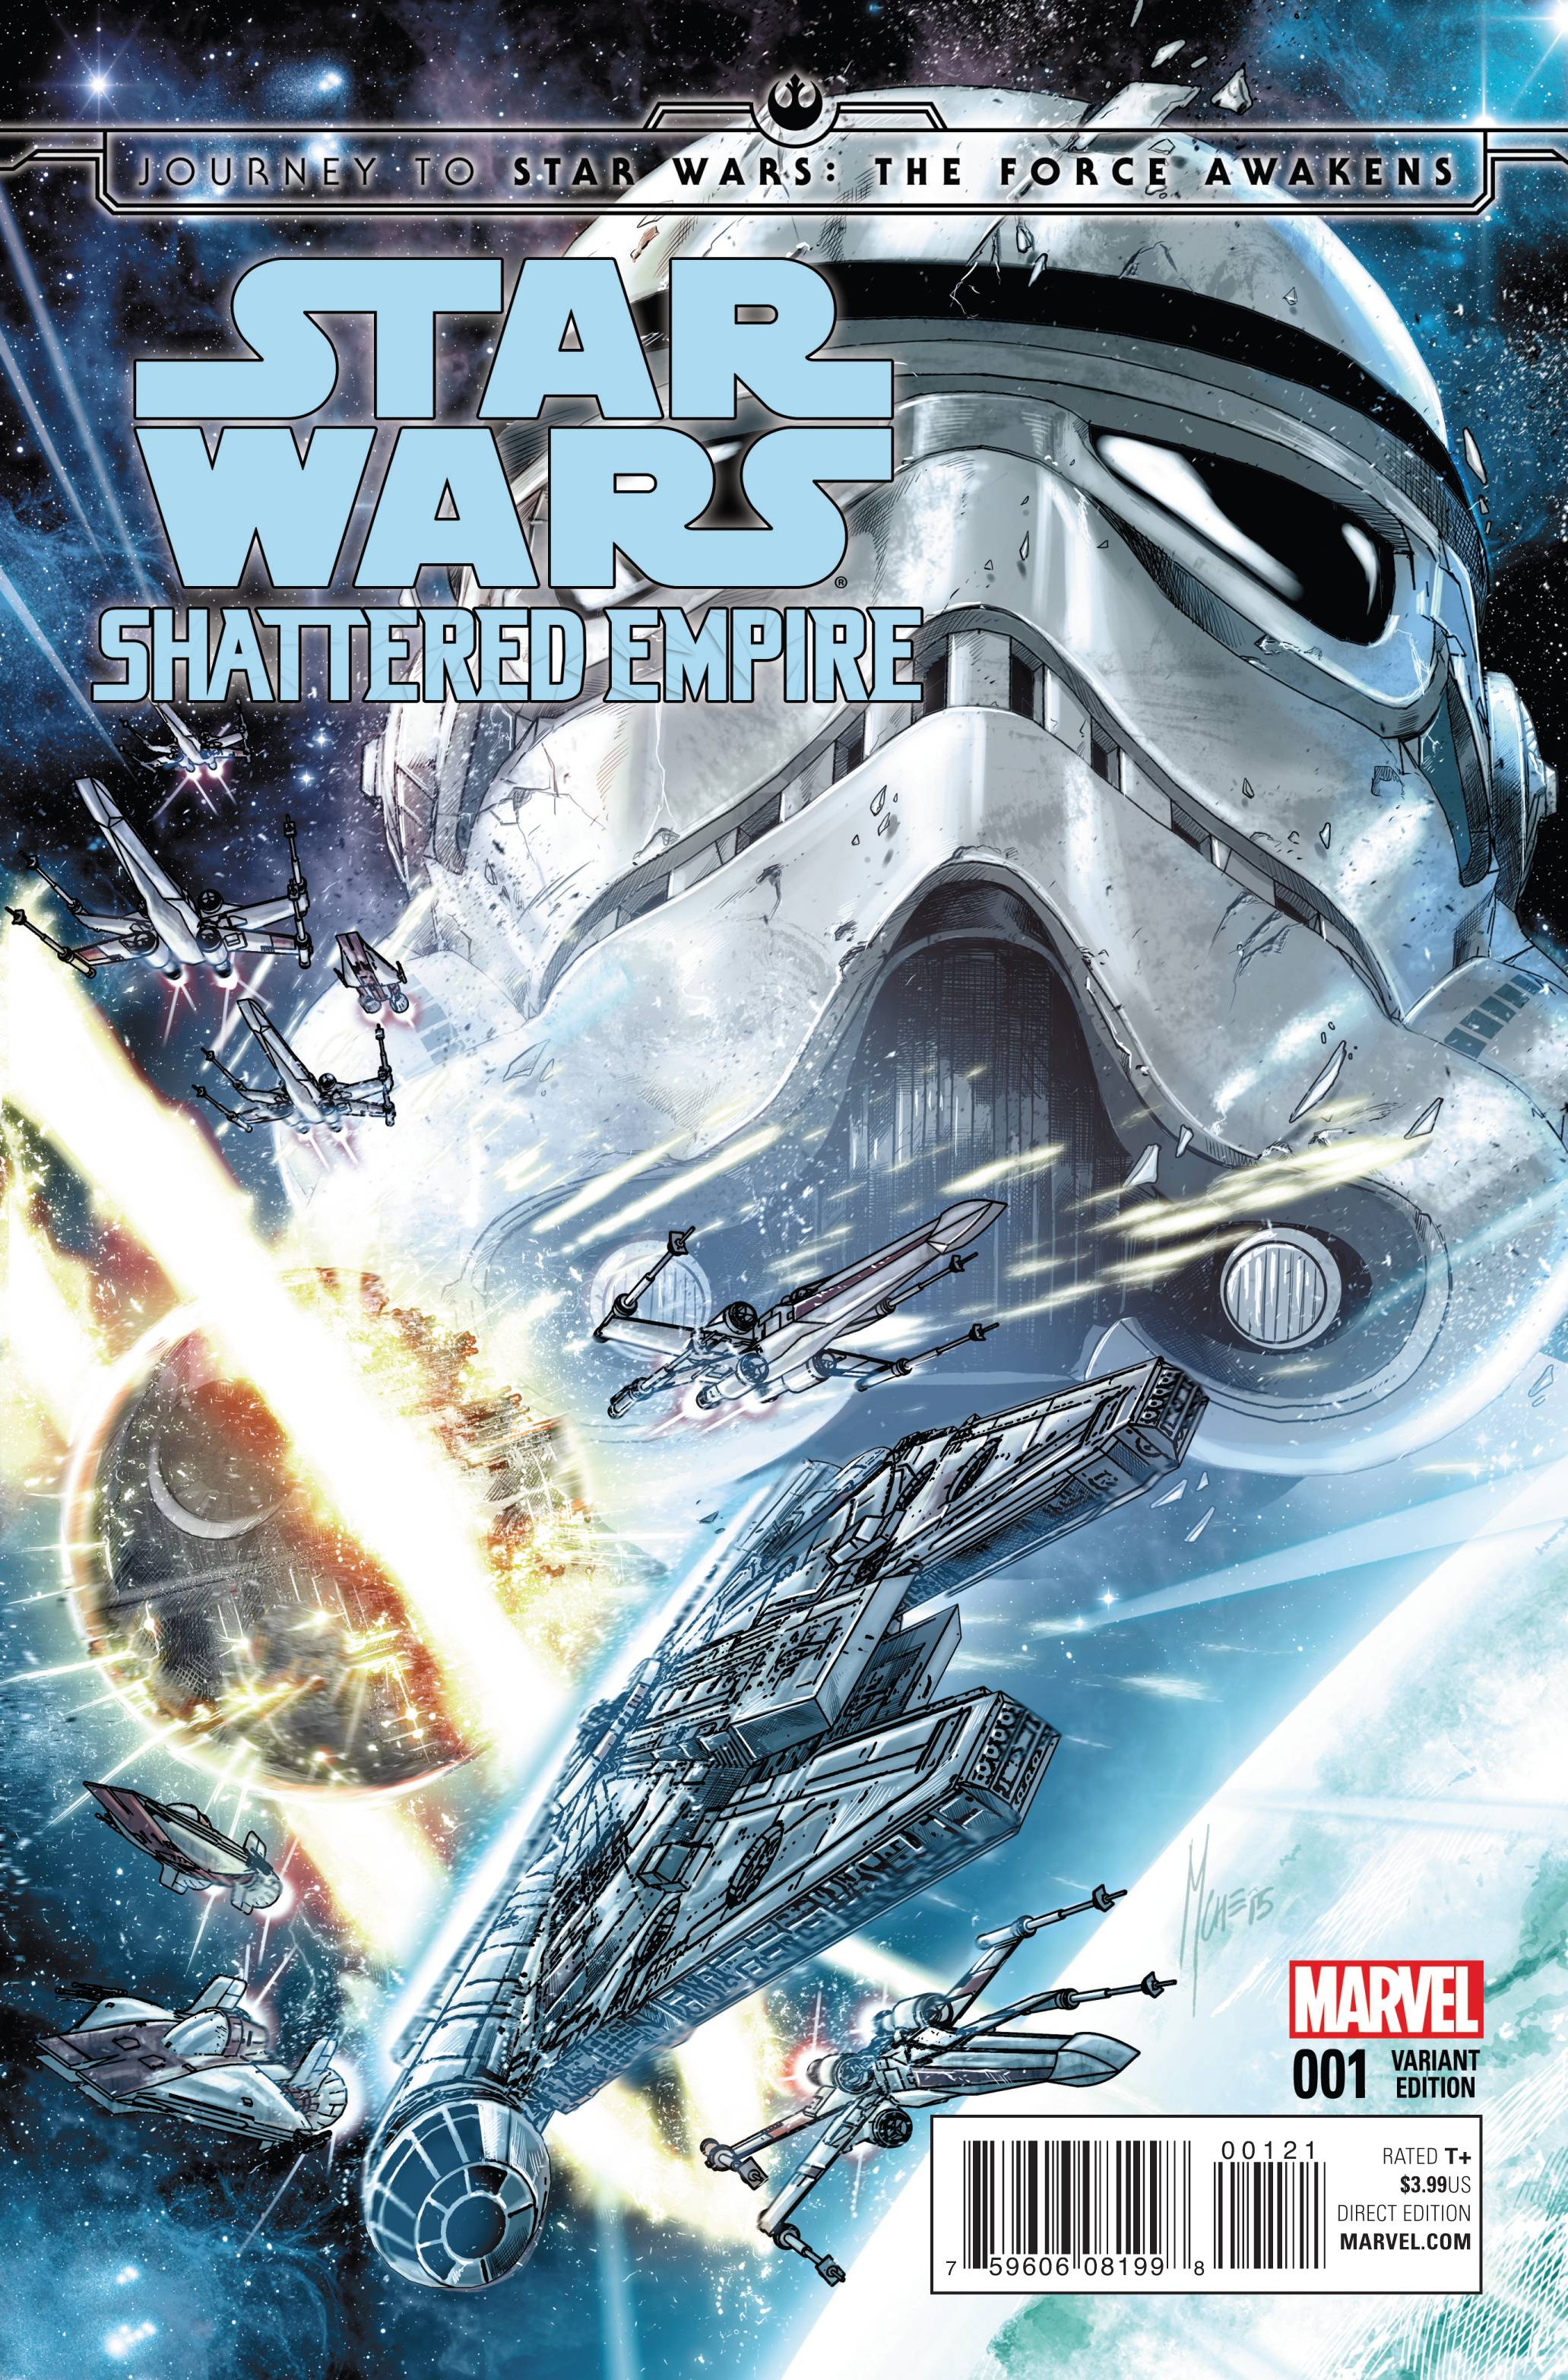 Journey to Star Wars: The Force Awakens: Shattered Empire #1 (Marco Checchetto Variant Cover) (09.09.2015)